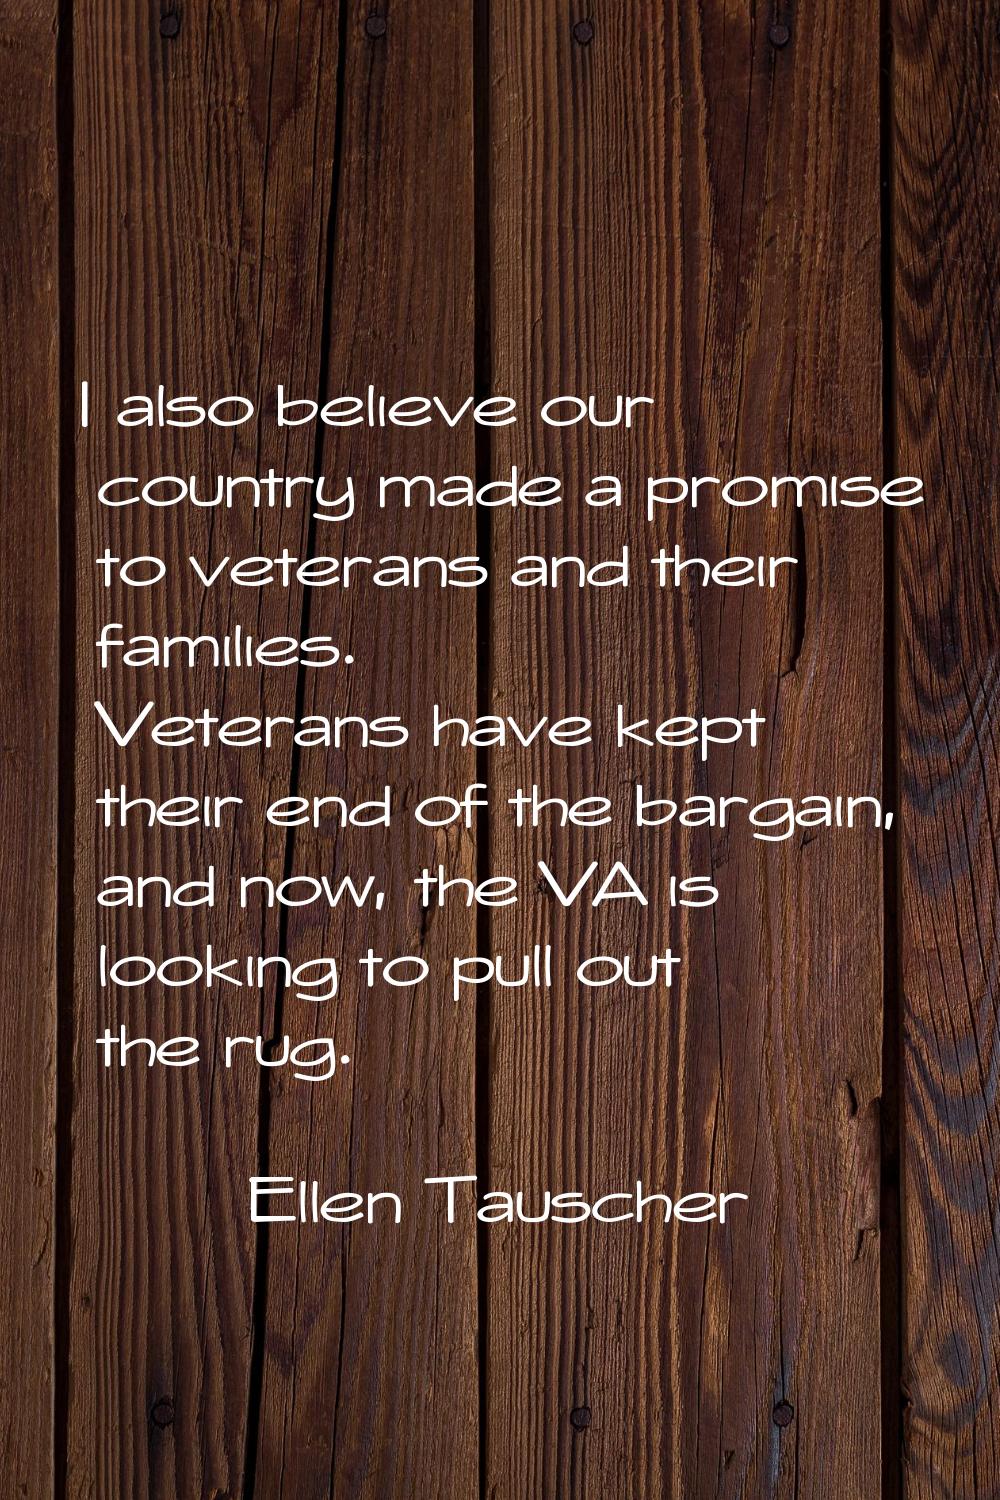 I also believe our country made a promise to veterans and their families. Veterans have kept their 